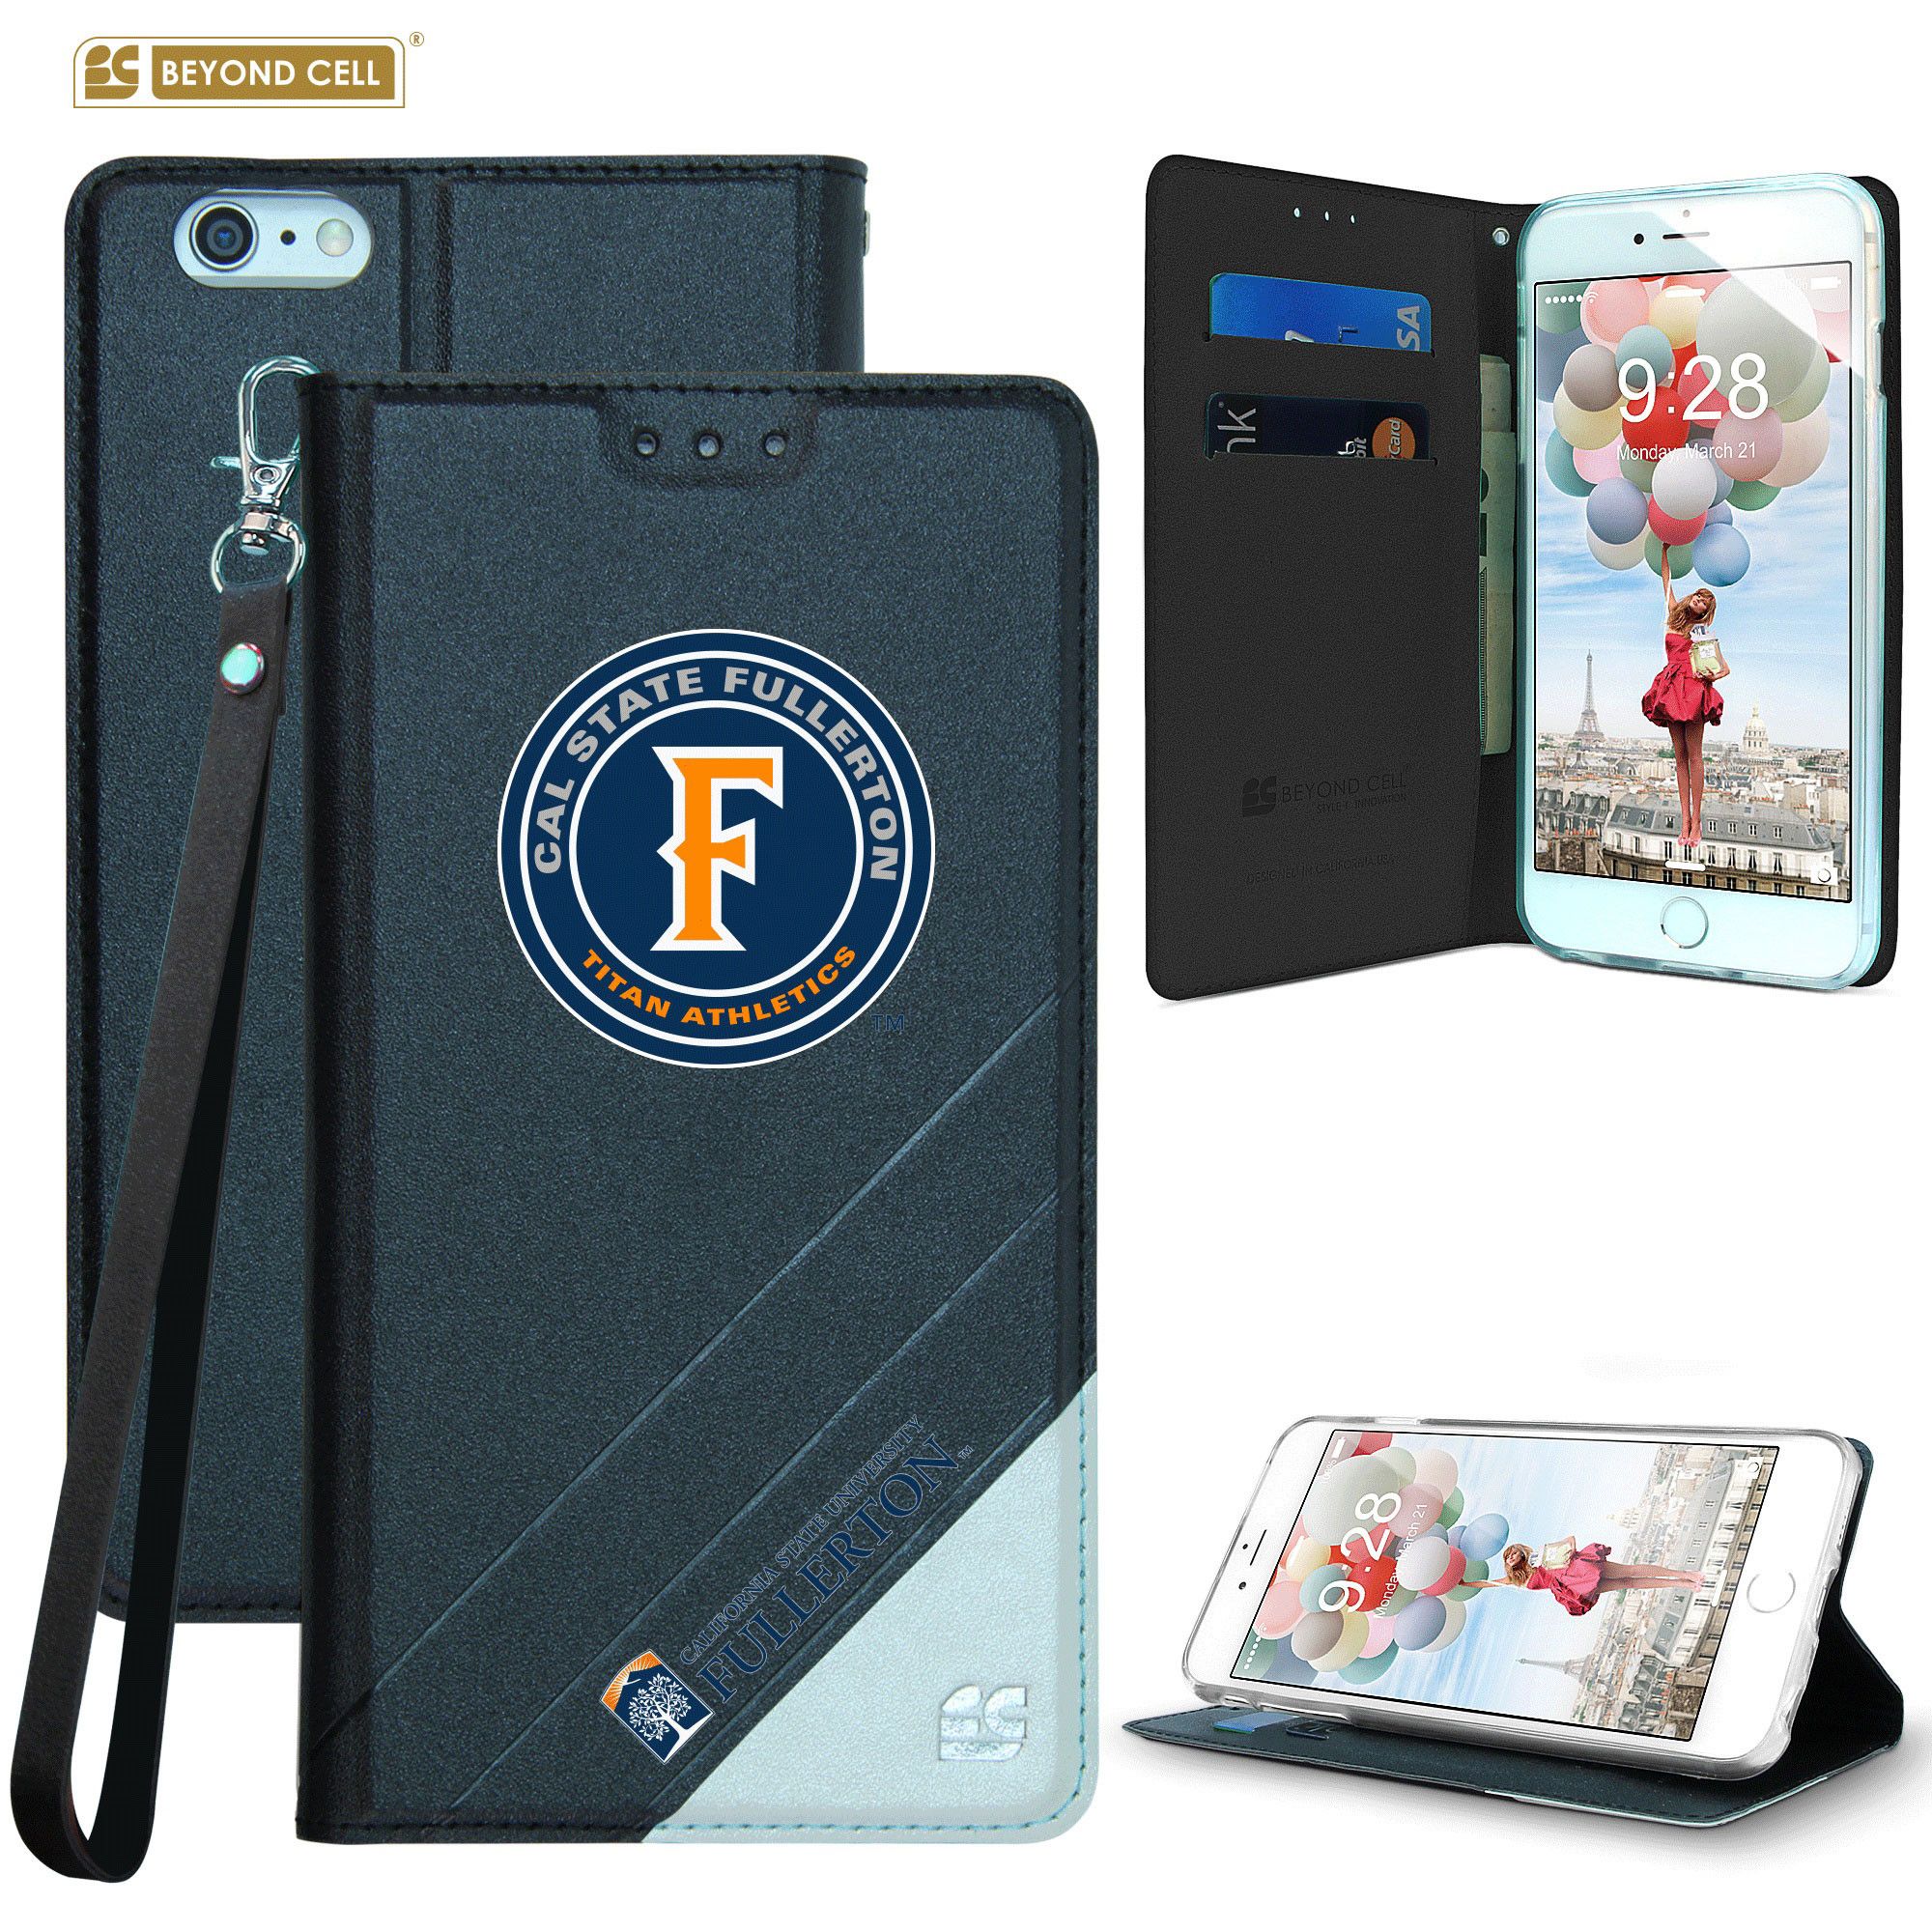 Apple iPhone 6 Plus -  Licensed Cal State Fullerton Folding Wallet case with card slots and wristlet, Black